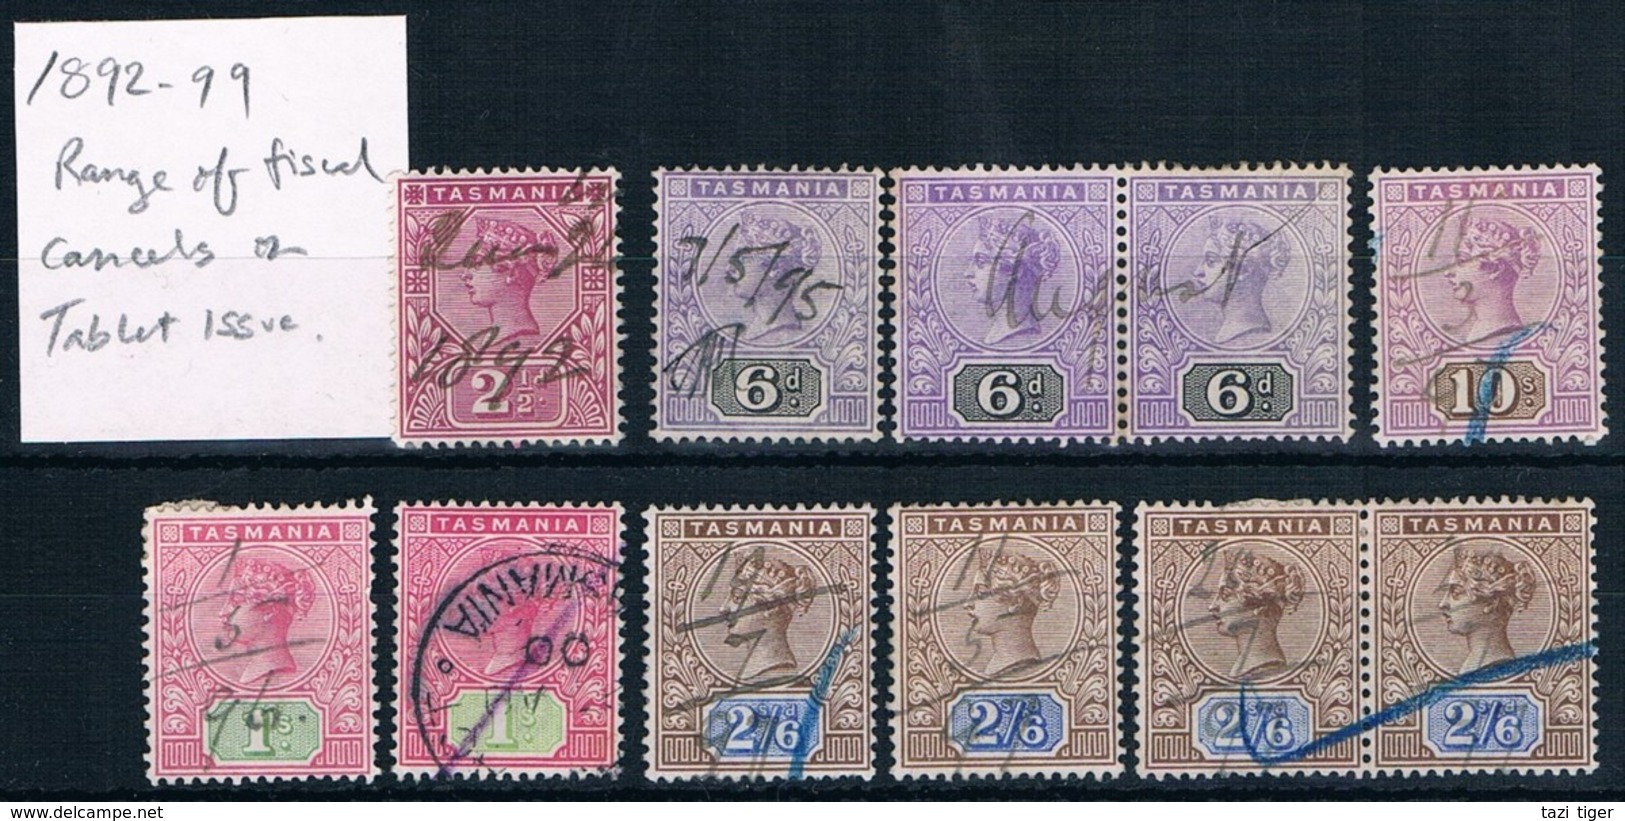 TASMANIA • 1892-99 • Selection Of Q. Vic. Tablet • Fiscally Used (11) - Used Stamps